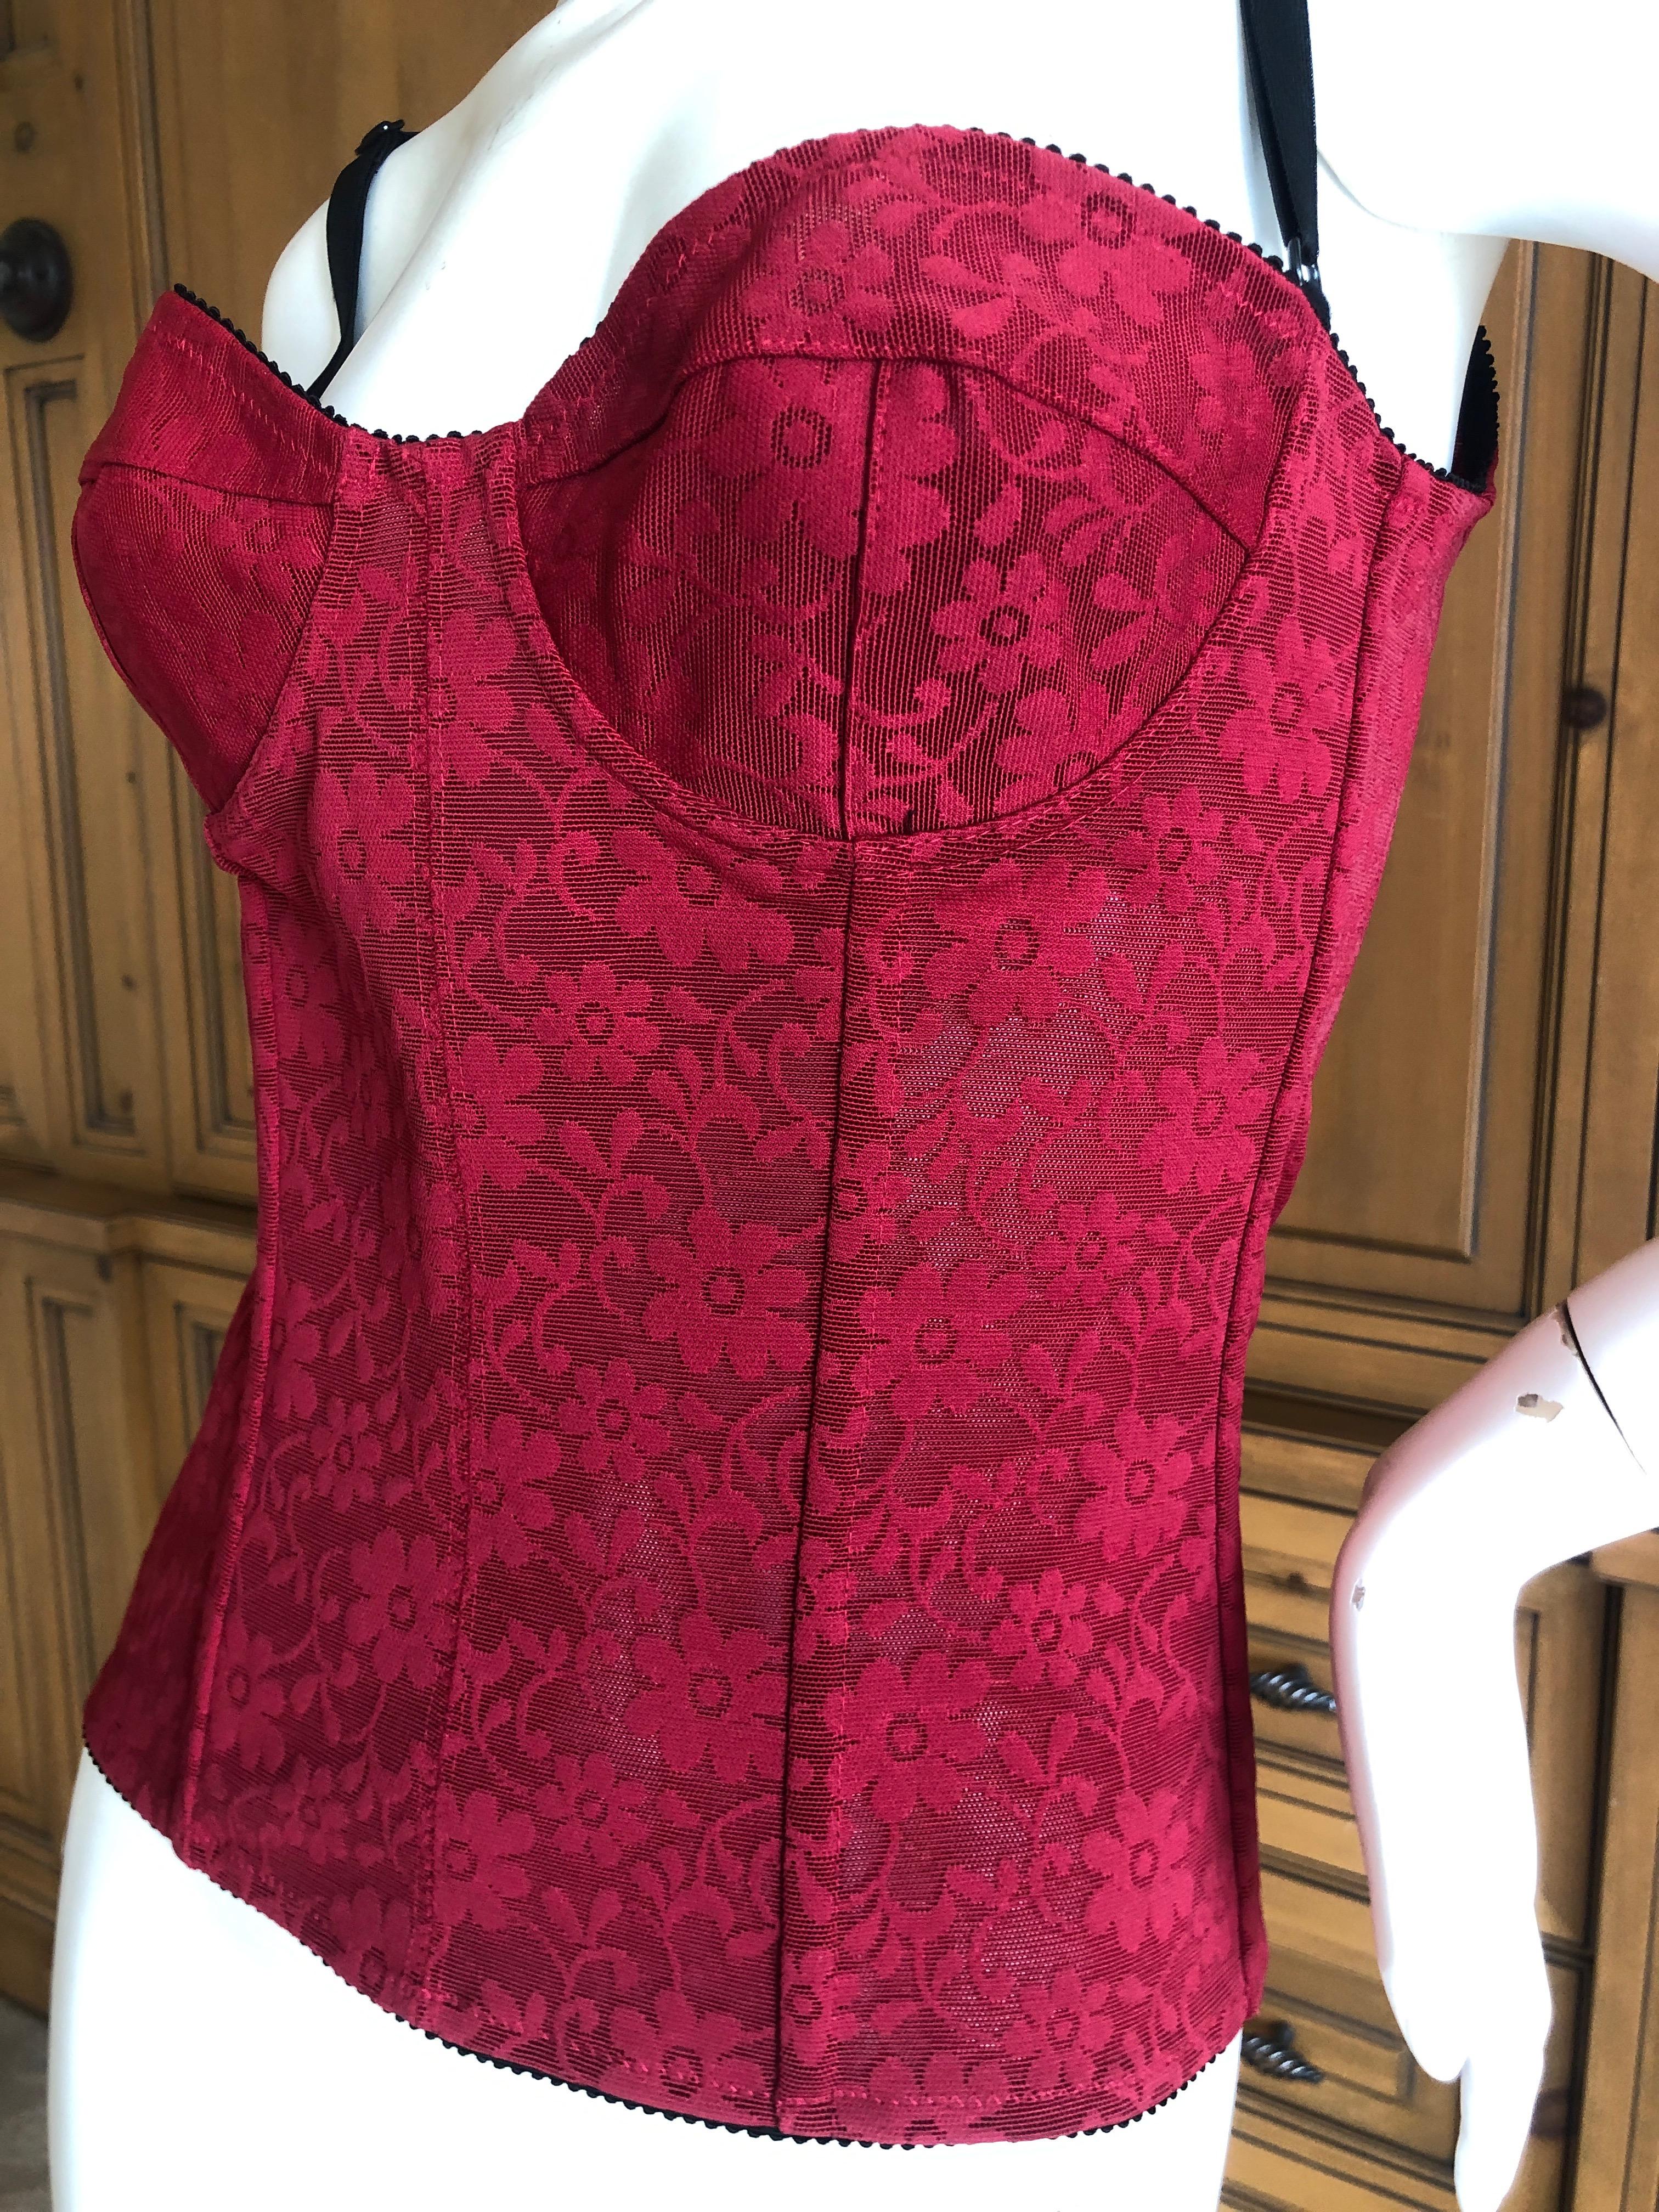 D&G Dolce & Gabbana Vintage Red Lace Corset In Good Condition For Sale In Cloverdale, CA